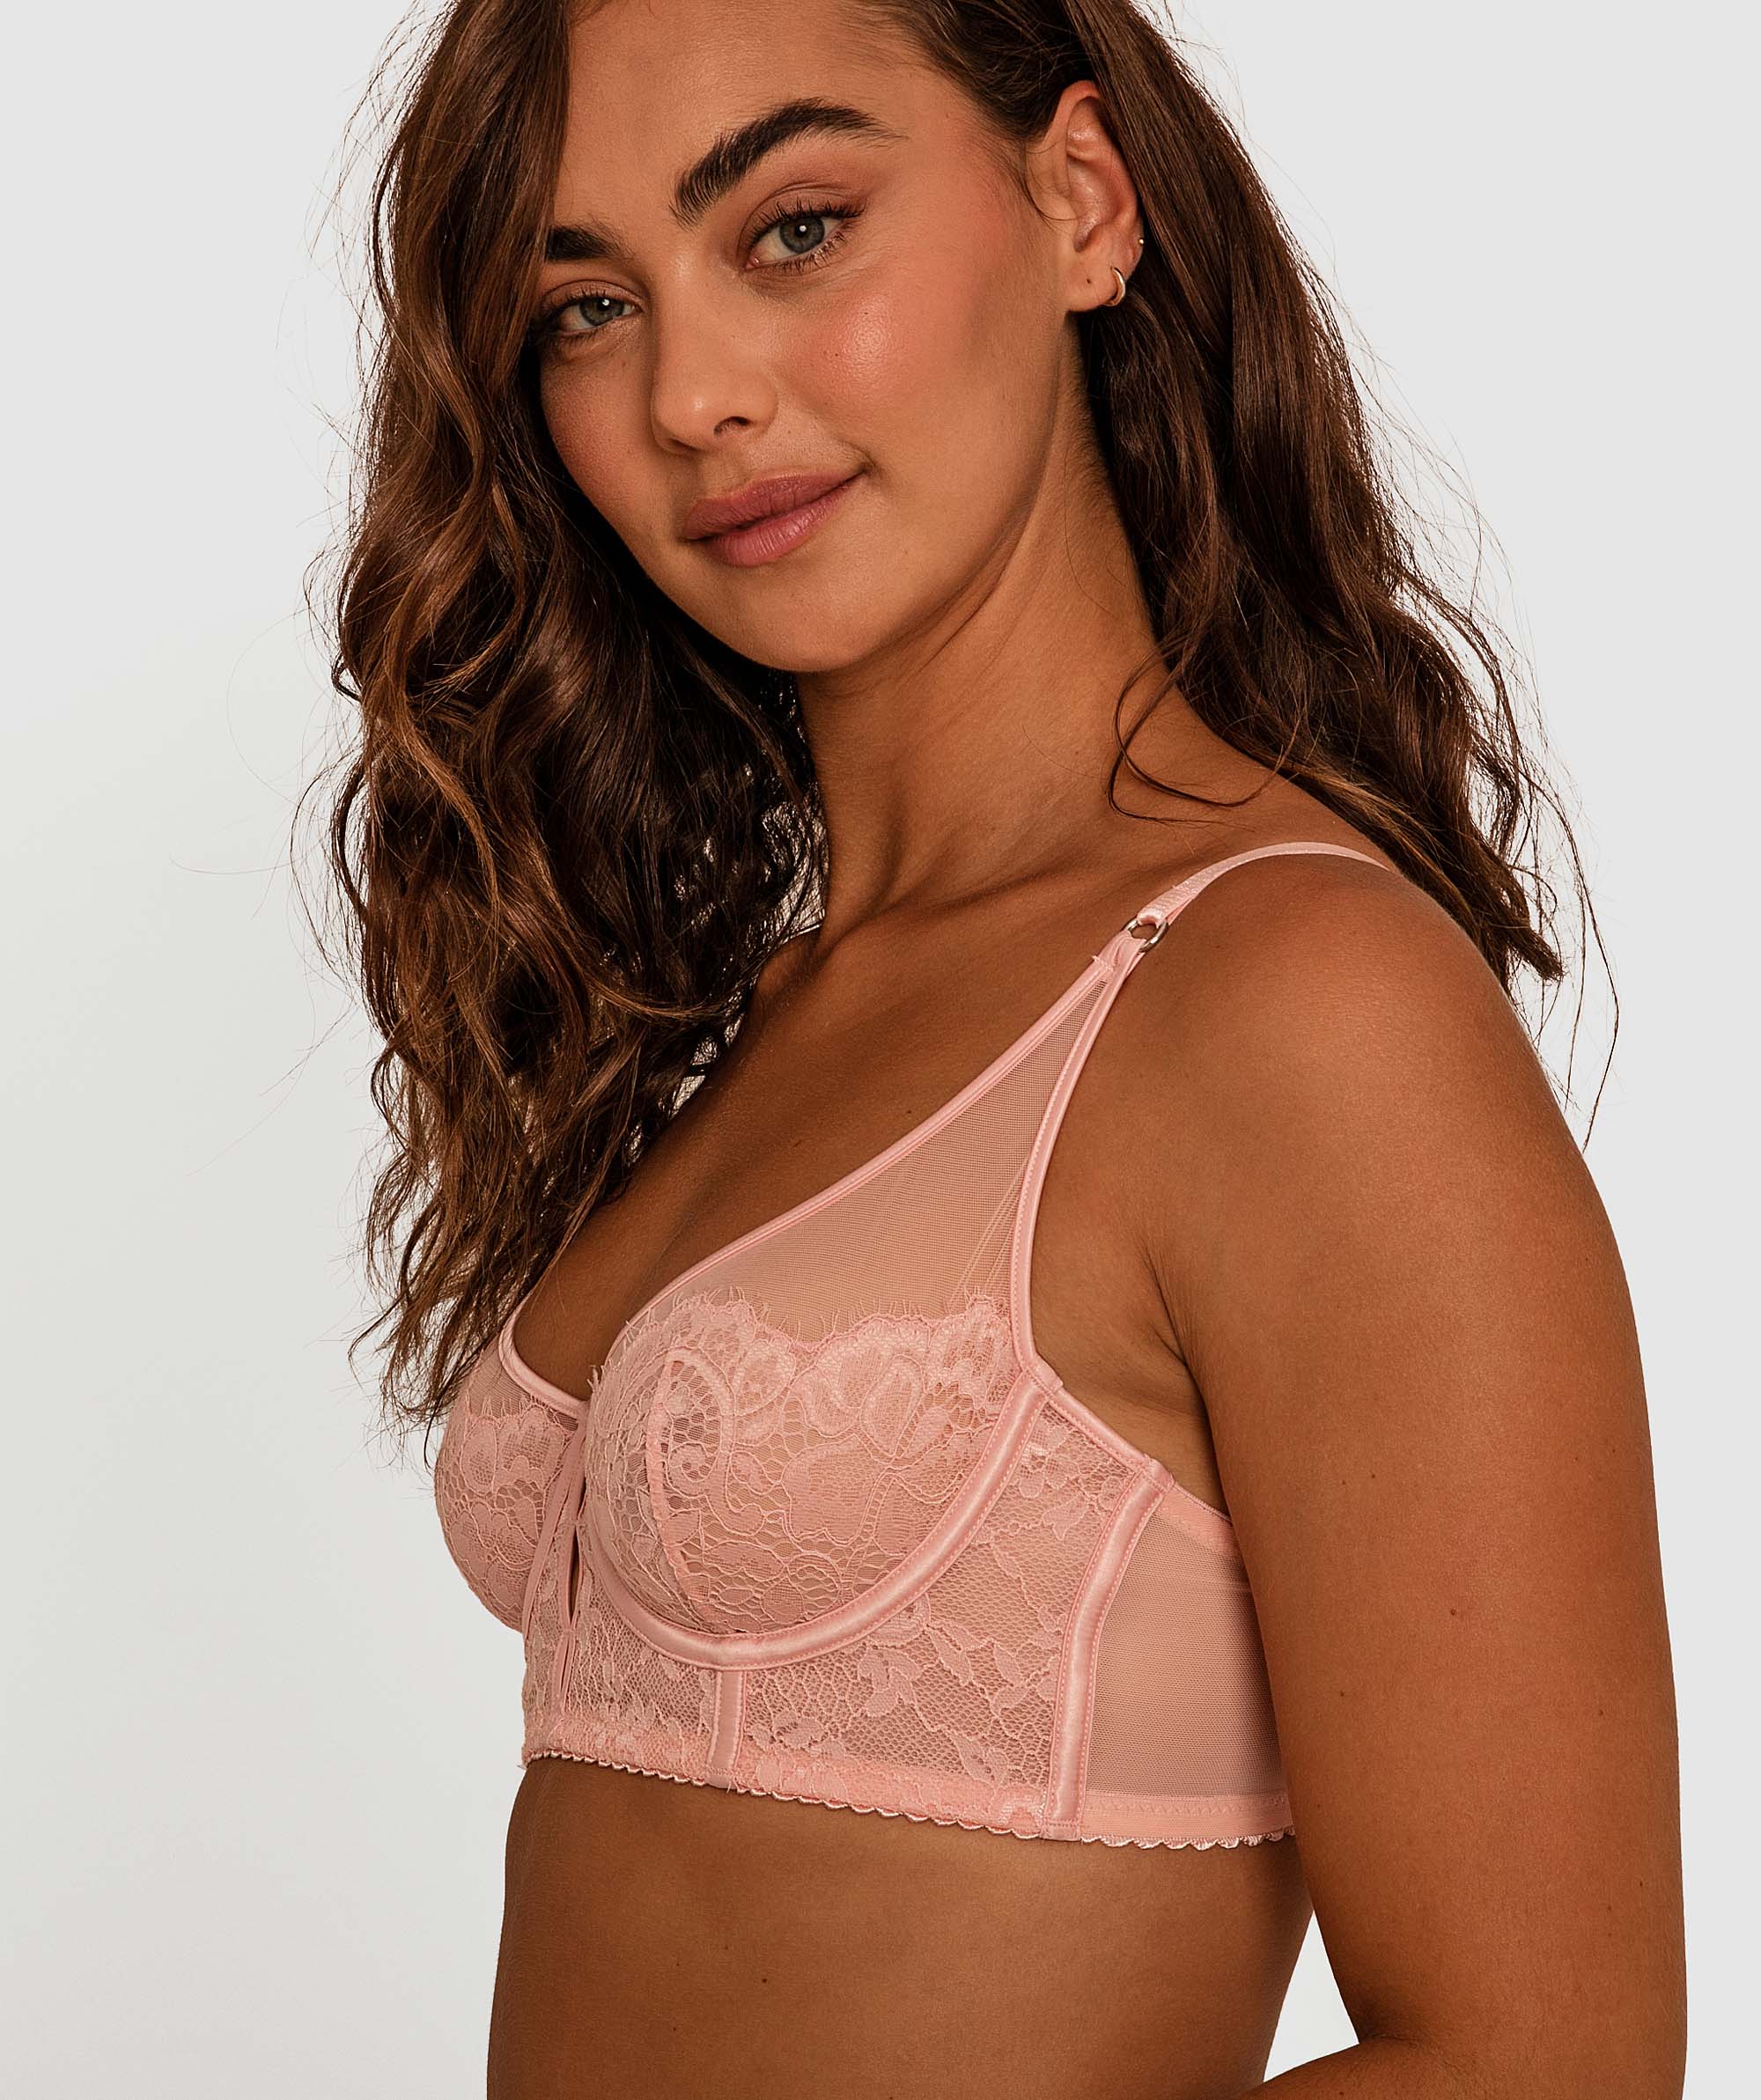 All About Me Underwire Bra - Blush Pink